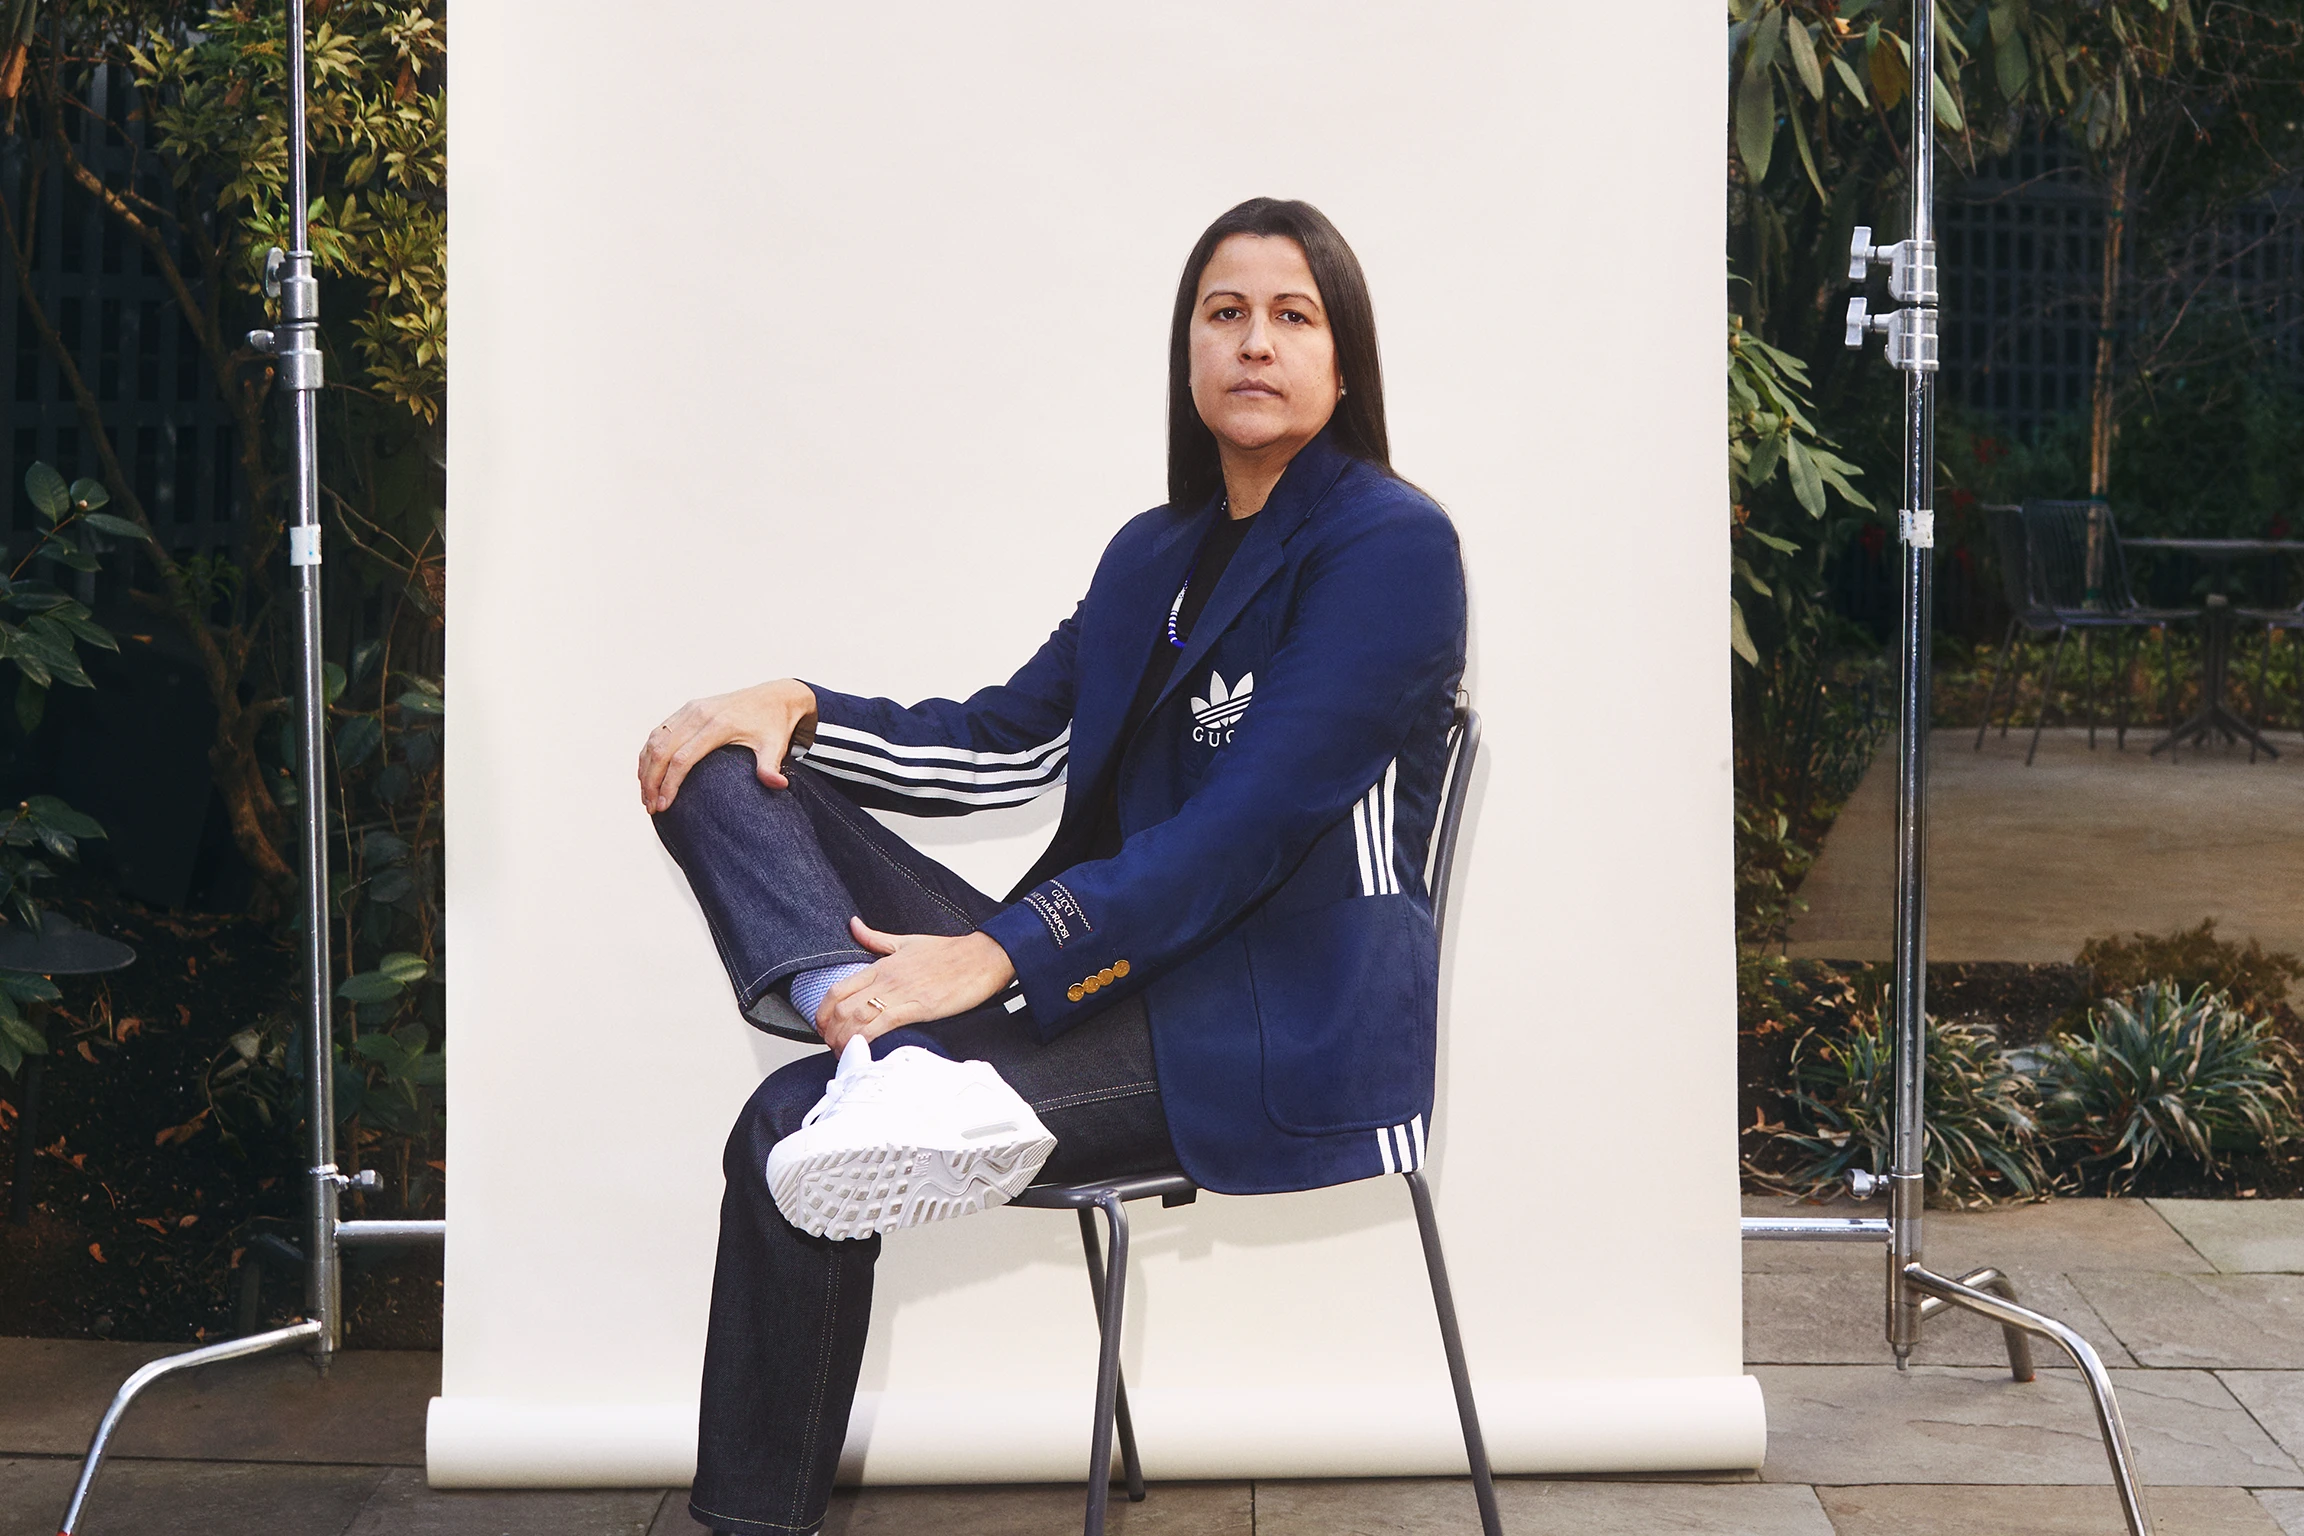 An Indigenous person wearing a sport track suit sits legs-crossed on a chair in front of a backdrop.